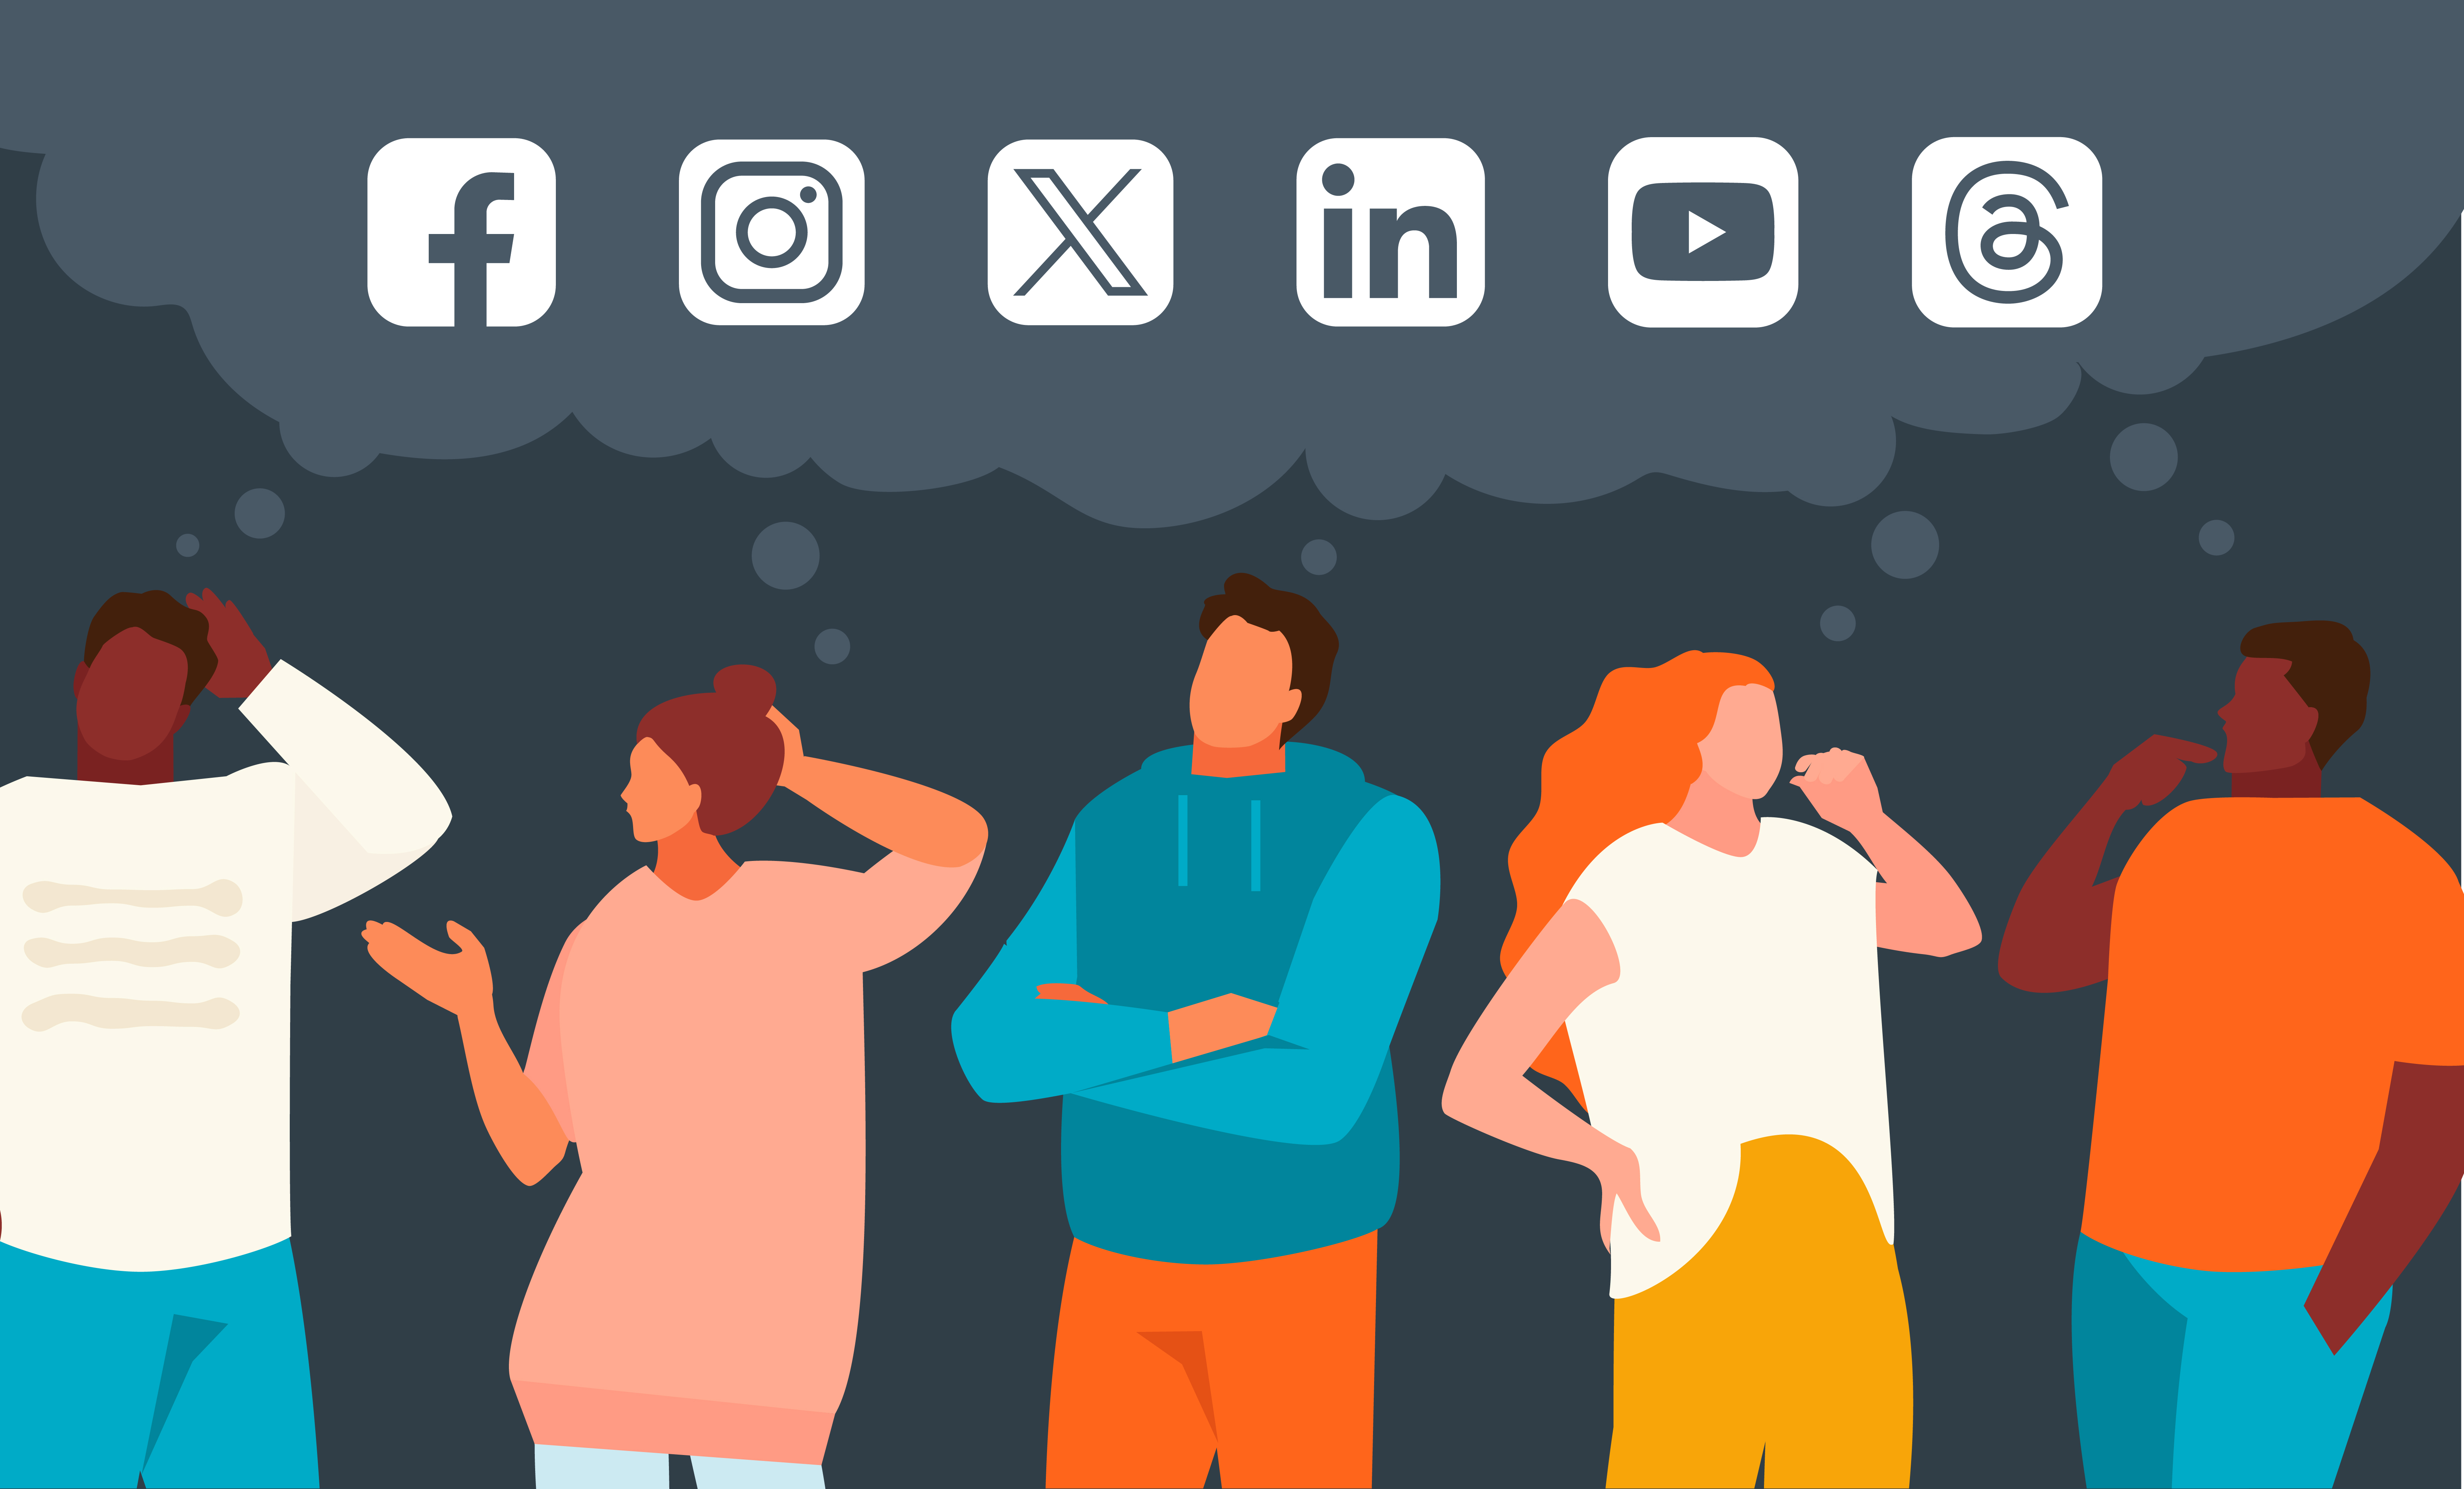 Group of people with a thought bubble filled with different social media logos inside